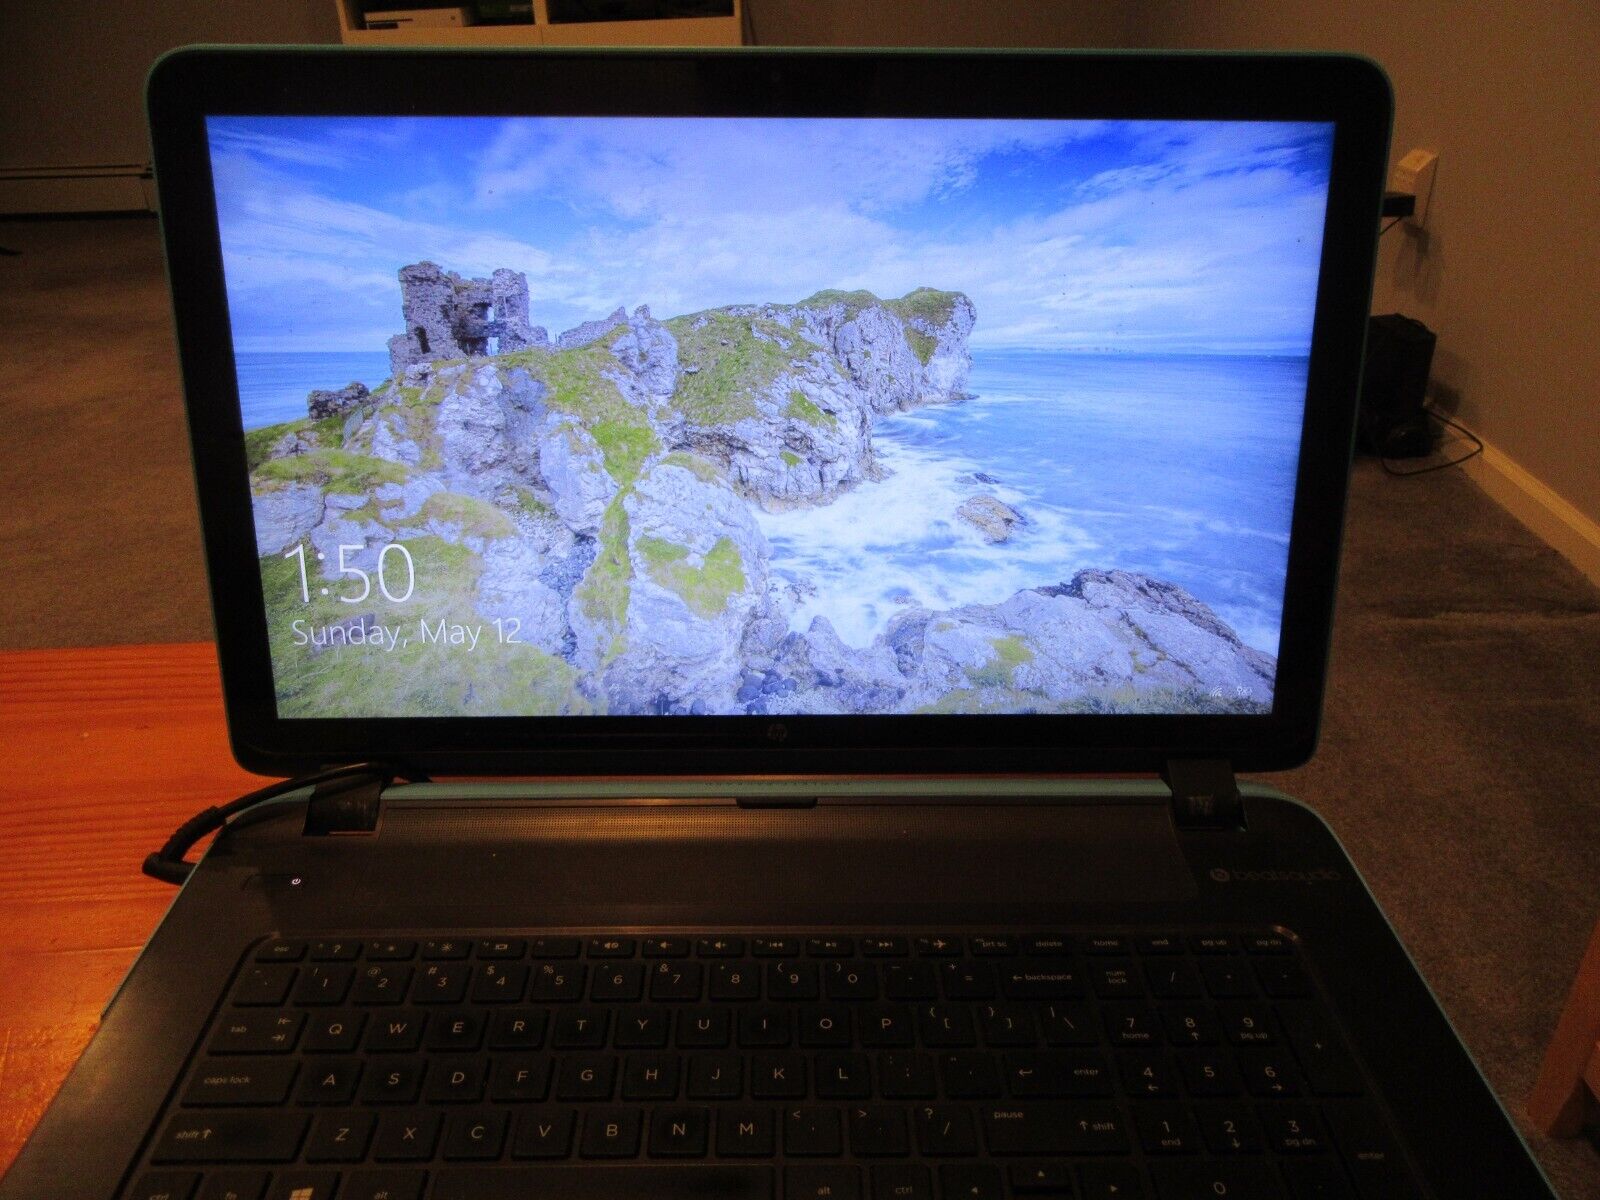 HP 17.3 Laptop LG HD+ BrightView WLED Backlit TouchScreen Display LP173WD1 TL H8